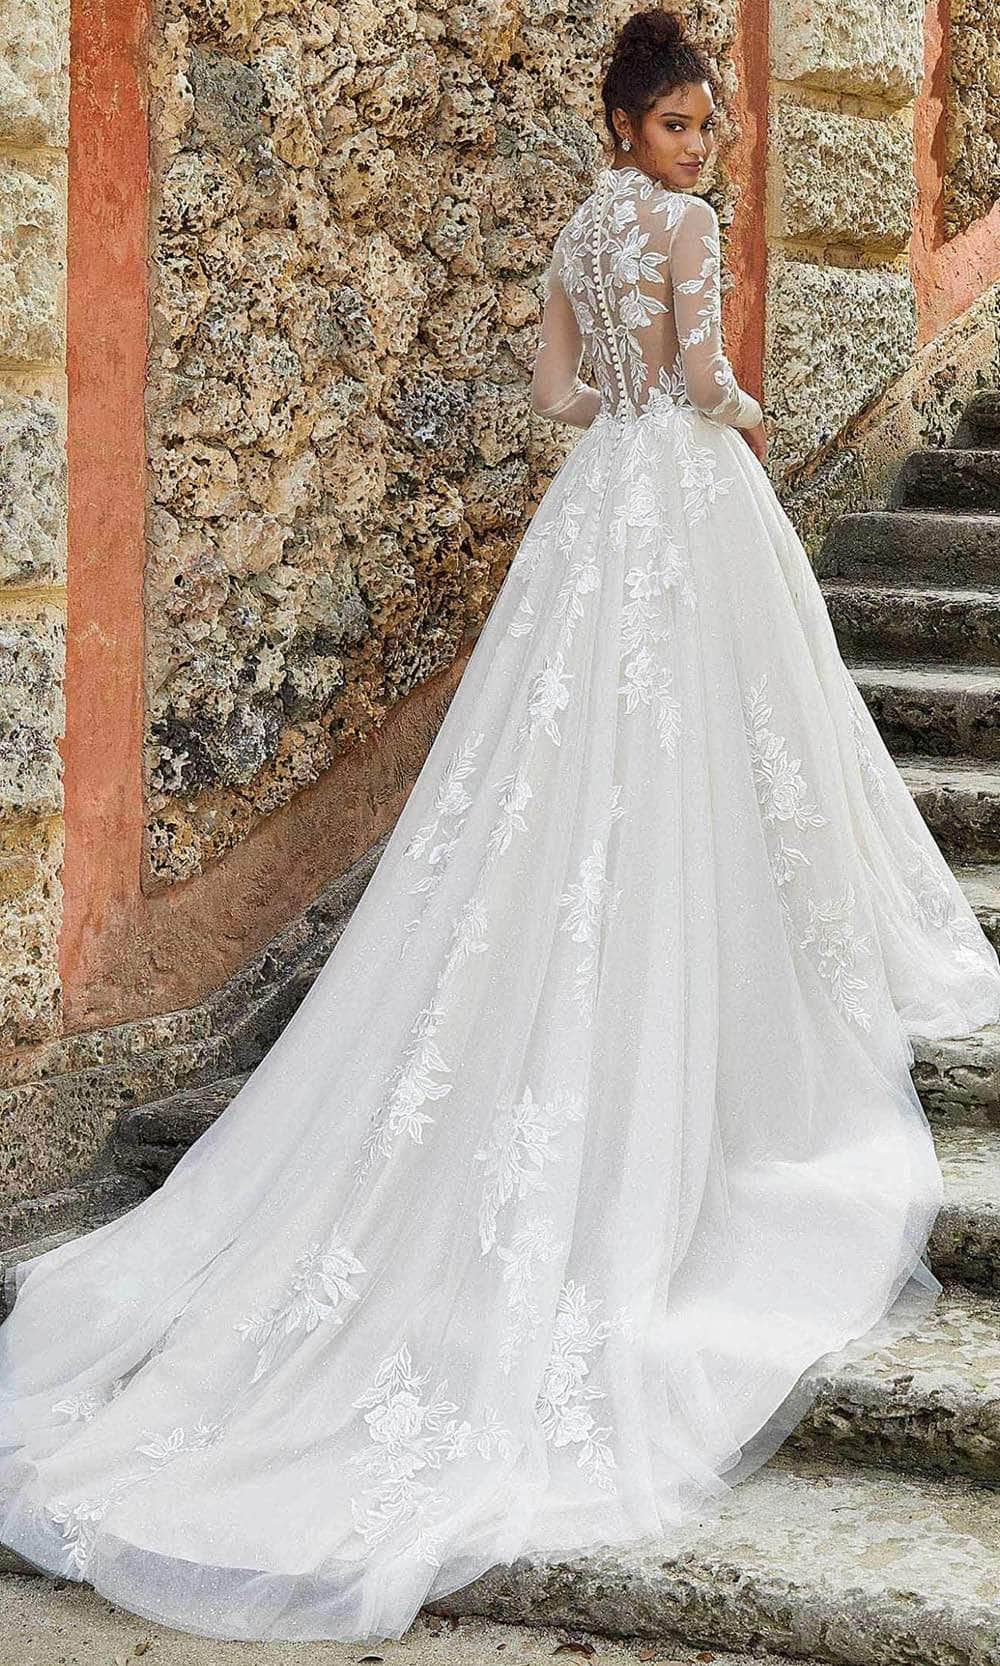 High Neck Long Sleeve Wedding Dresses Lace Appliques A Line Tulle Ball Gowns  | eBay